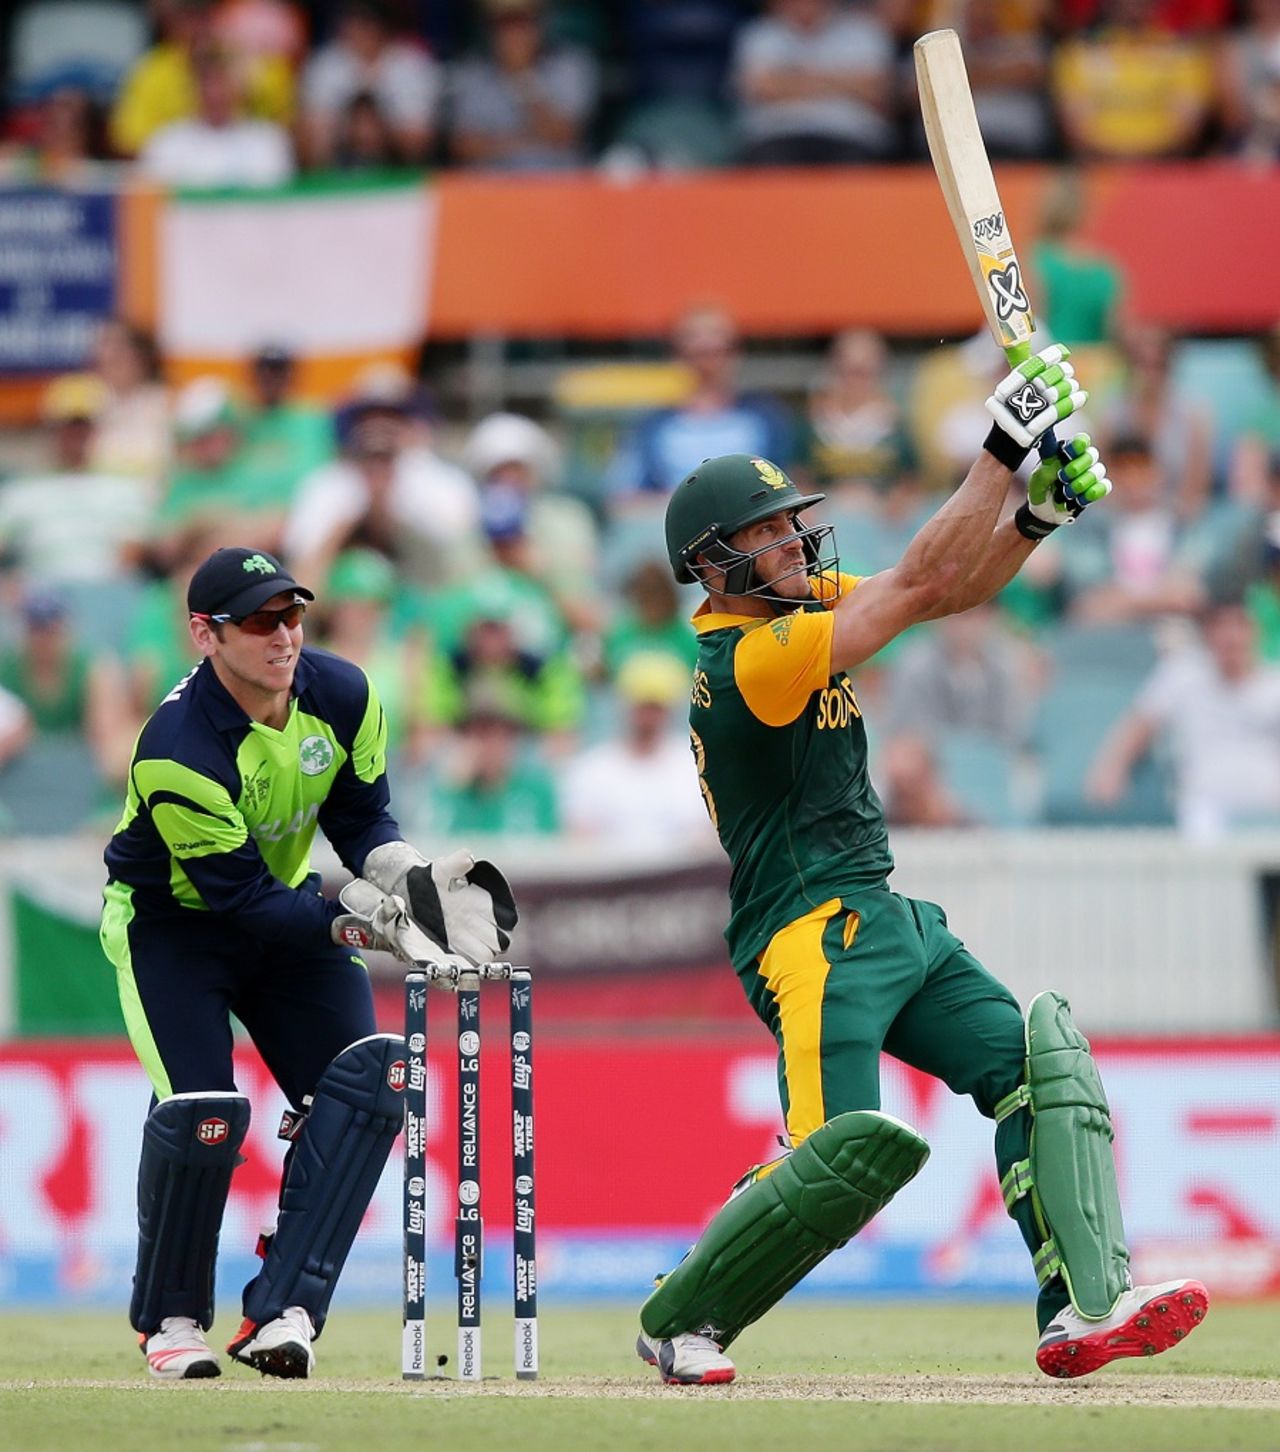 Faf du Plessis deposits the ball over the leg side, Ireland v South Africa, World Cup 2015, Group B, Canberra, March 3, 2015